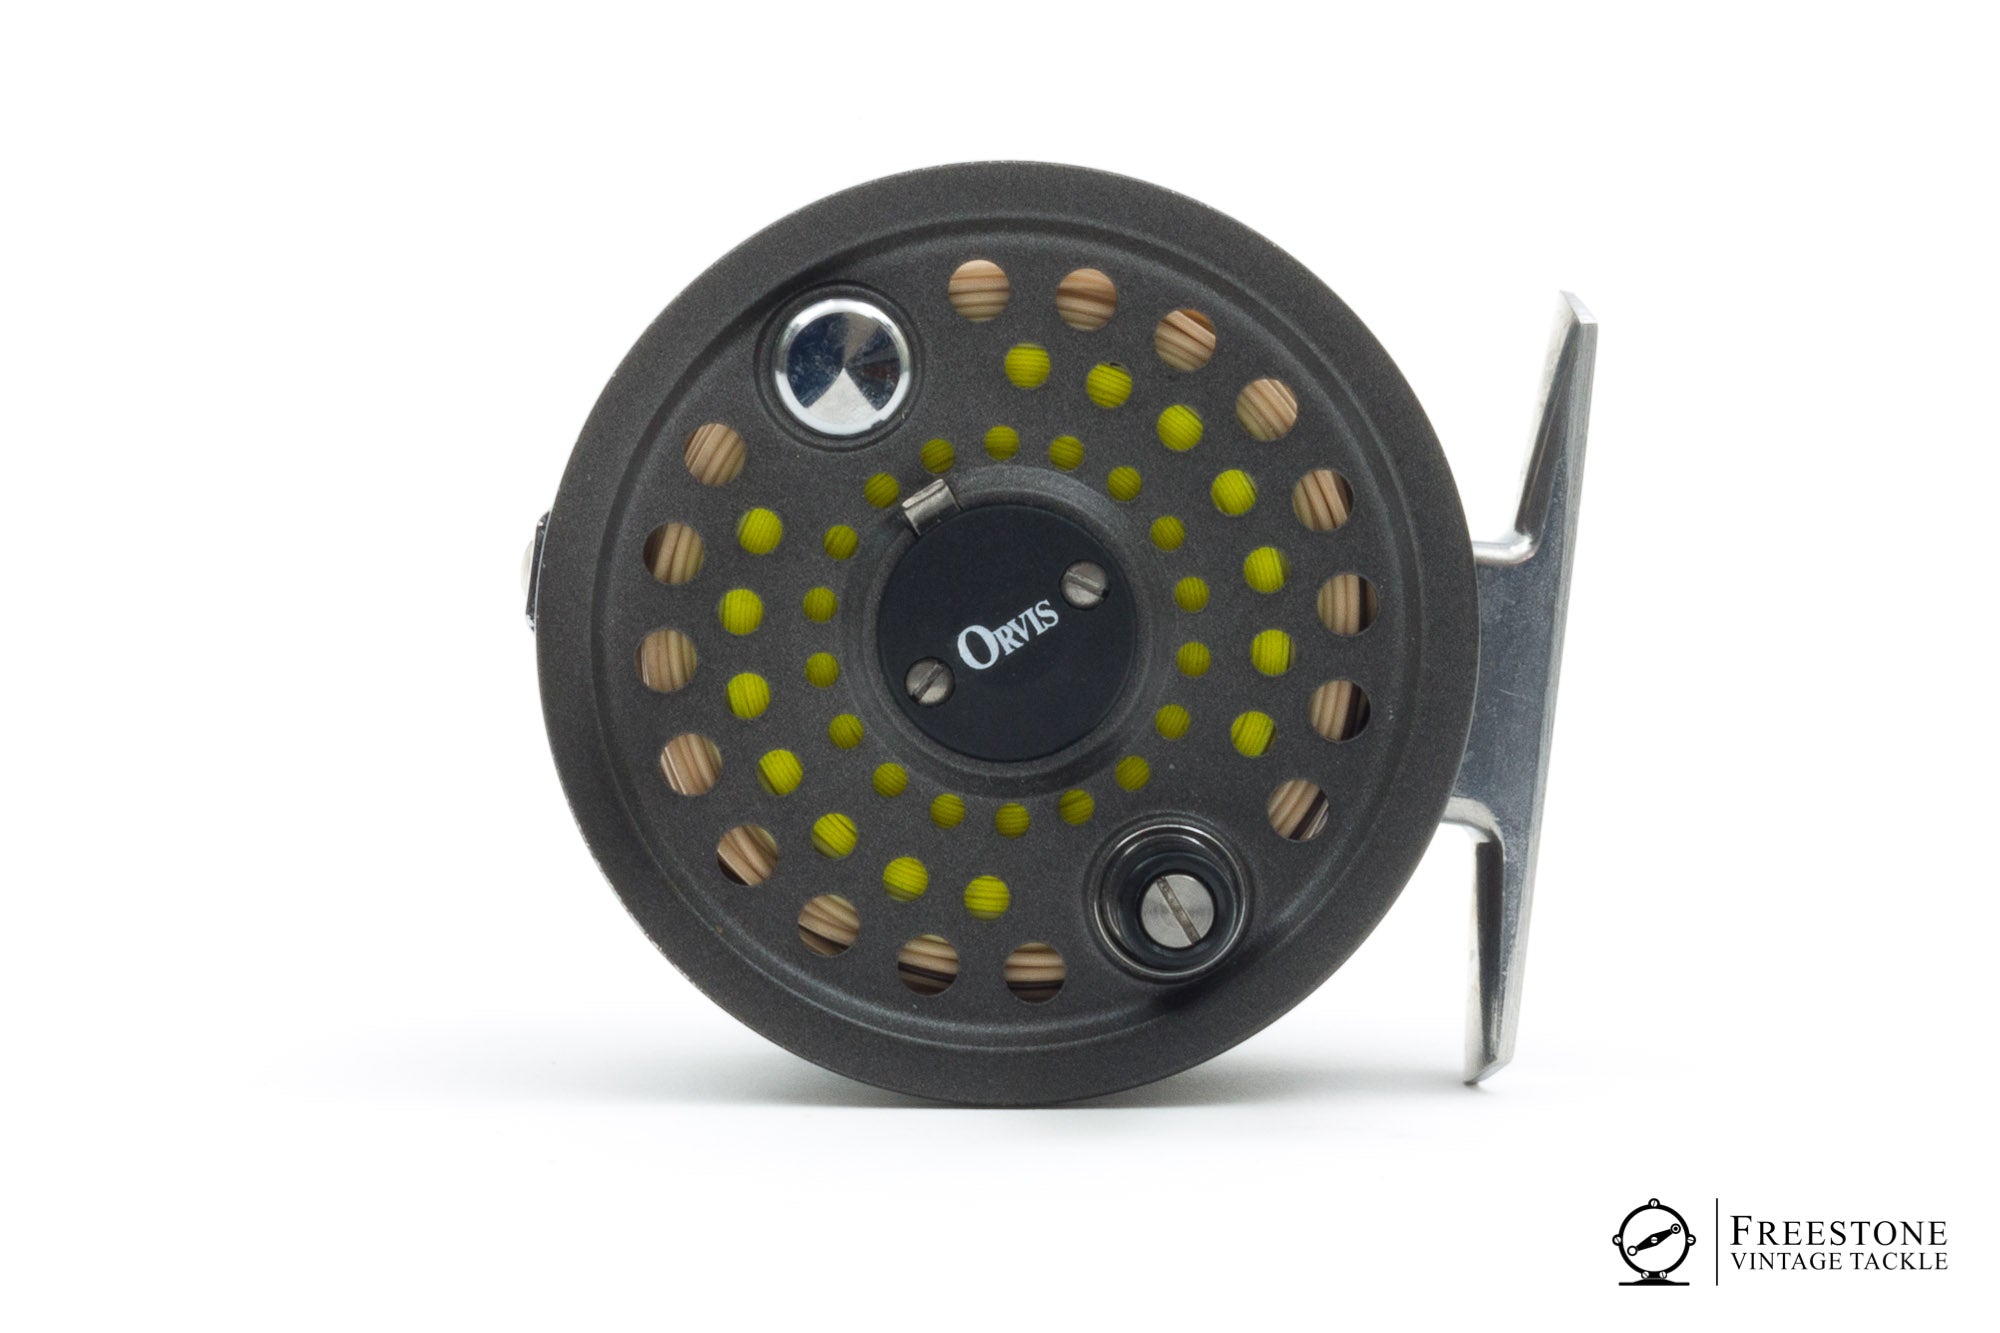 Orvis Battenkill BBS IV Fly Fishing Reel With Spare Spool / Case